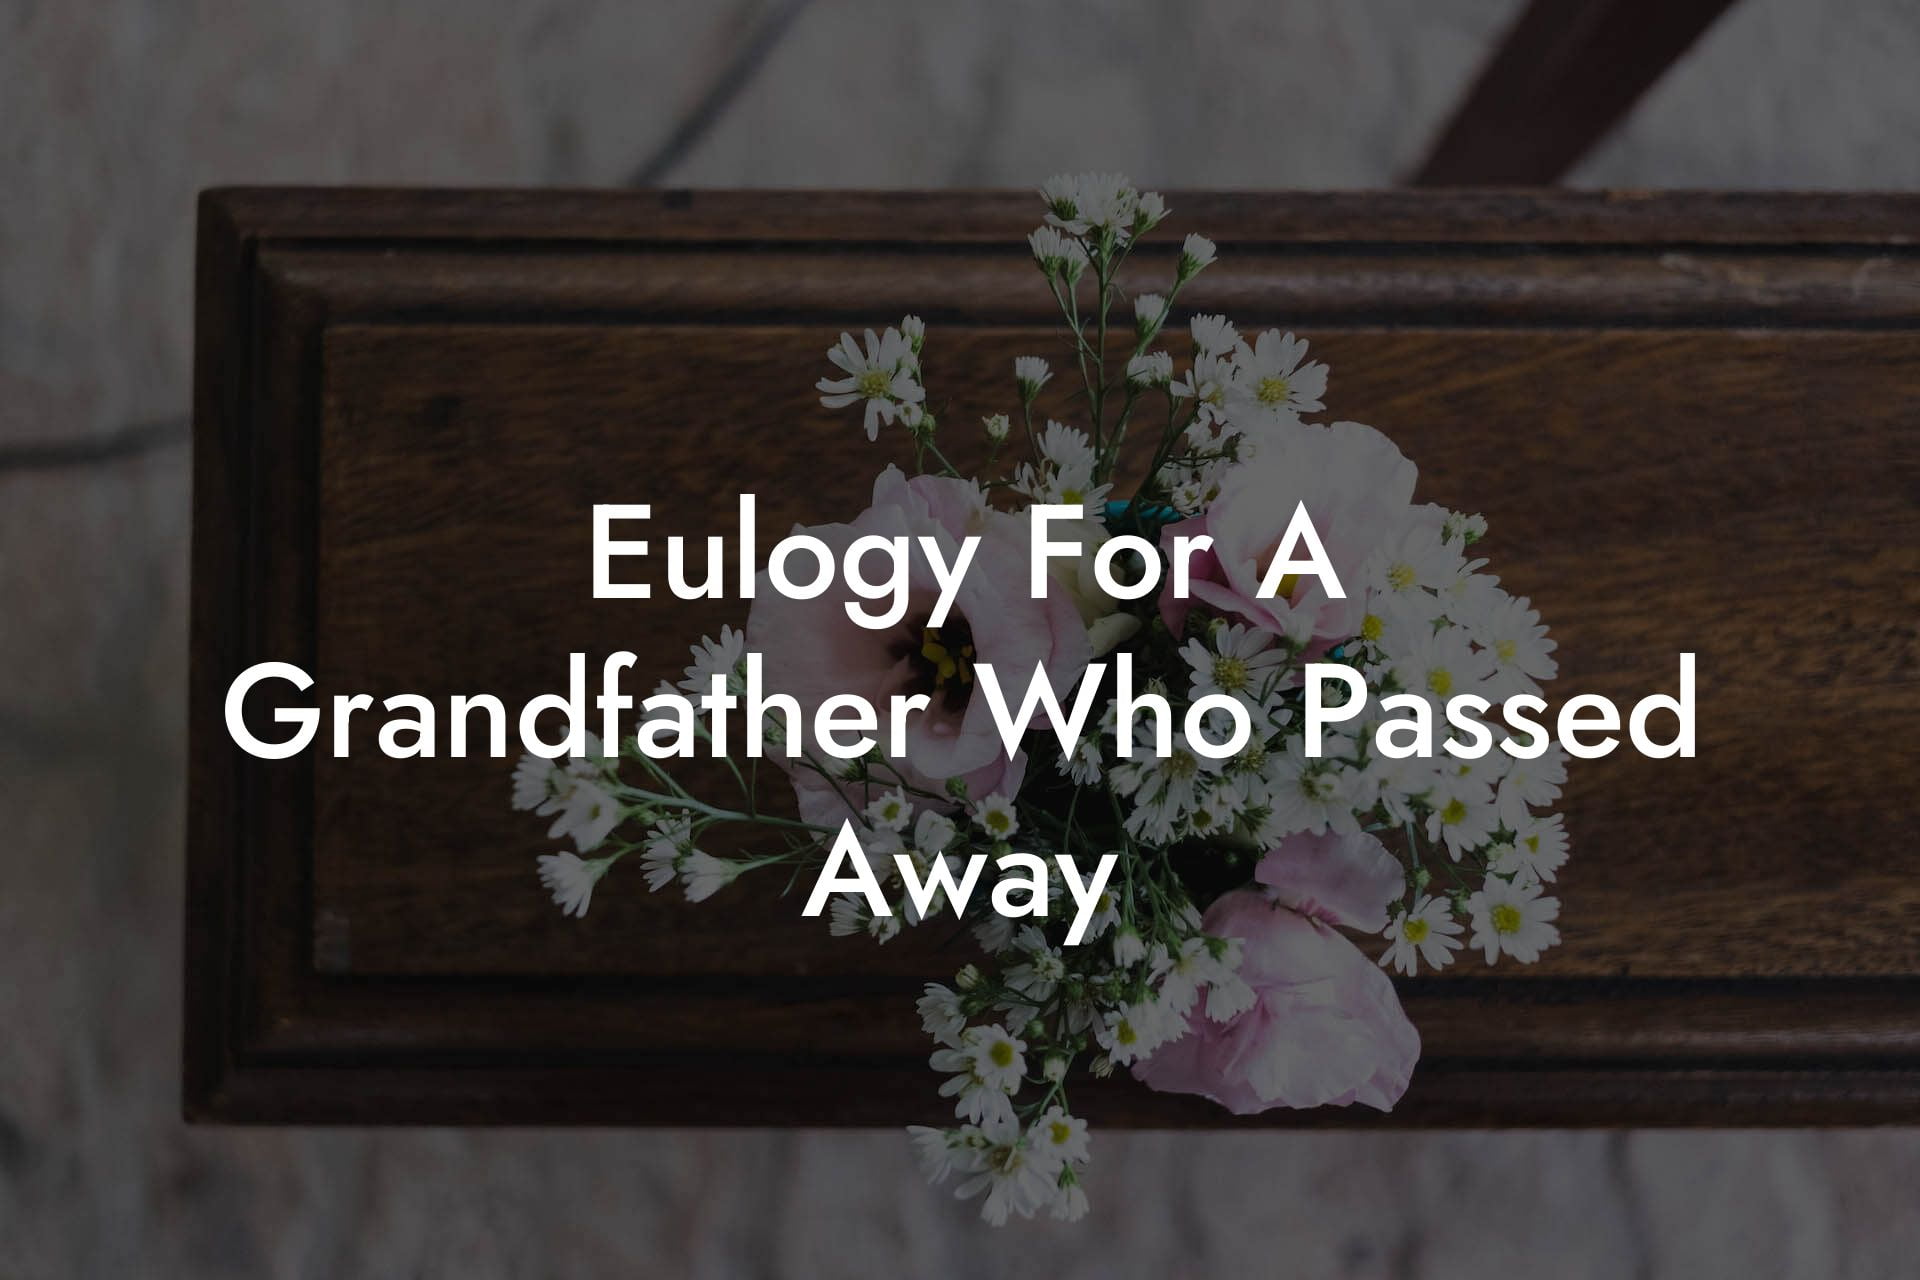 Eulogy For A Grandfather Who Passed Away